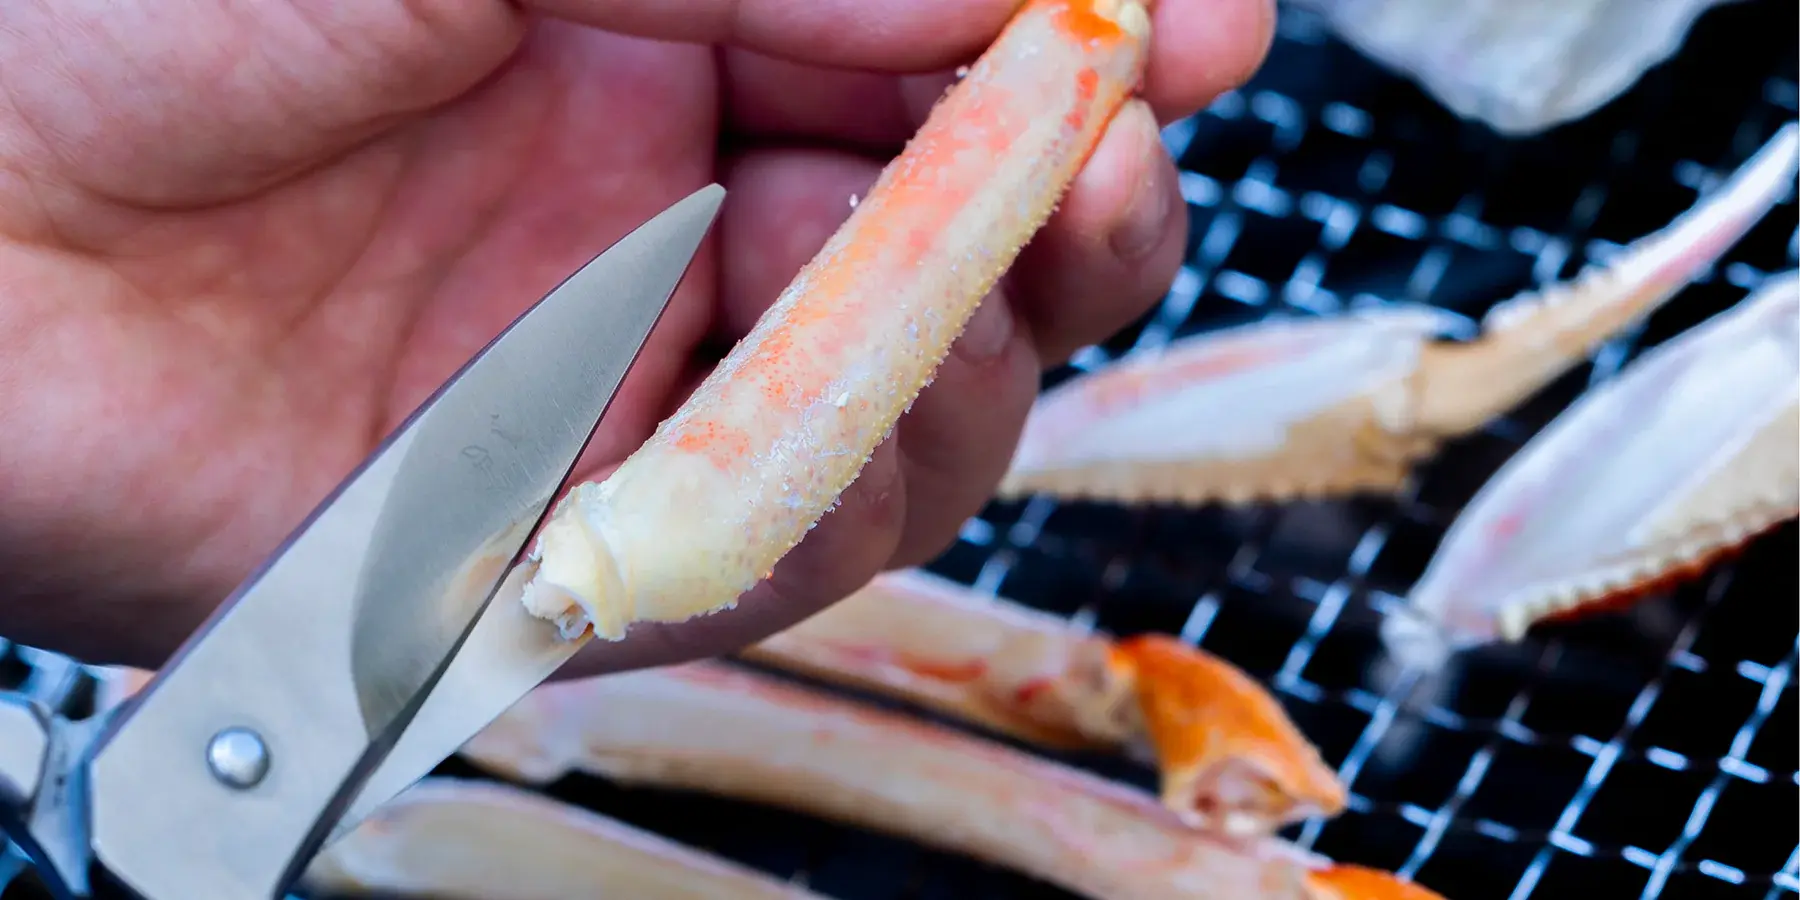 Discover our great selection of Seafood Tools at Globalkitchen Japan.